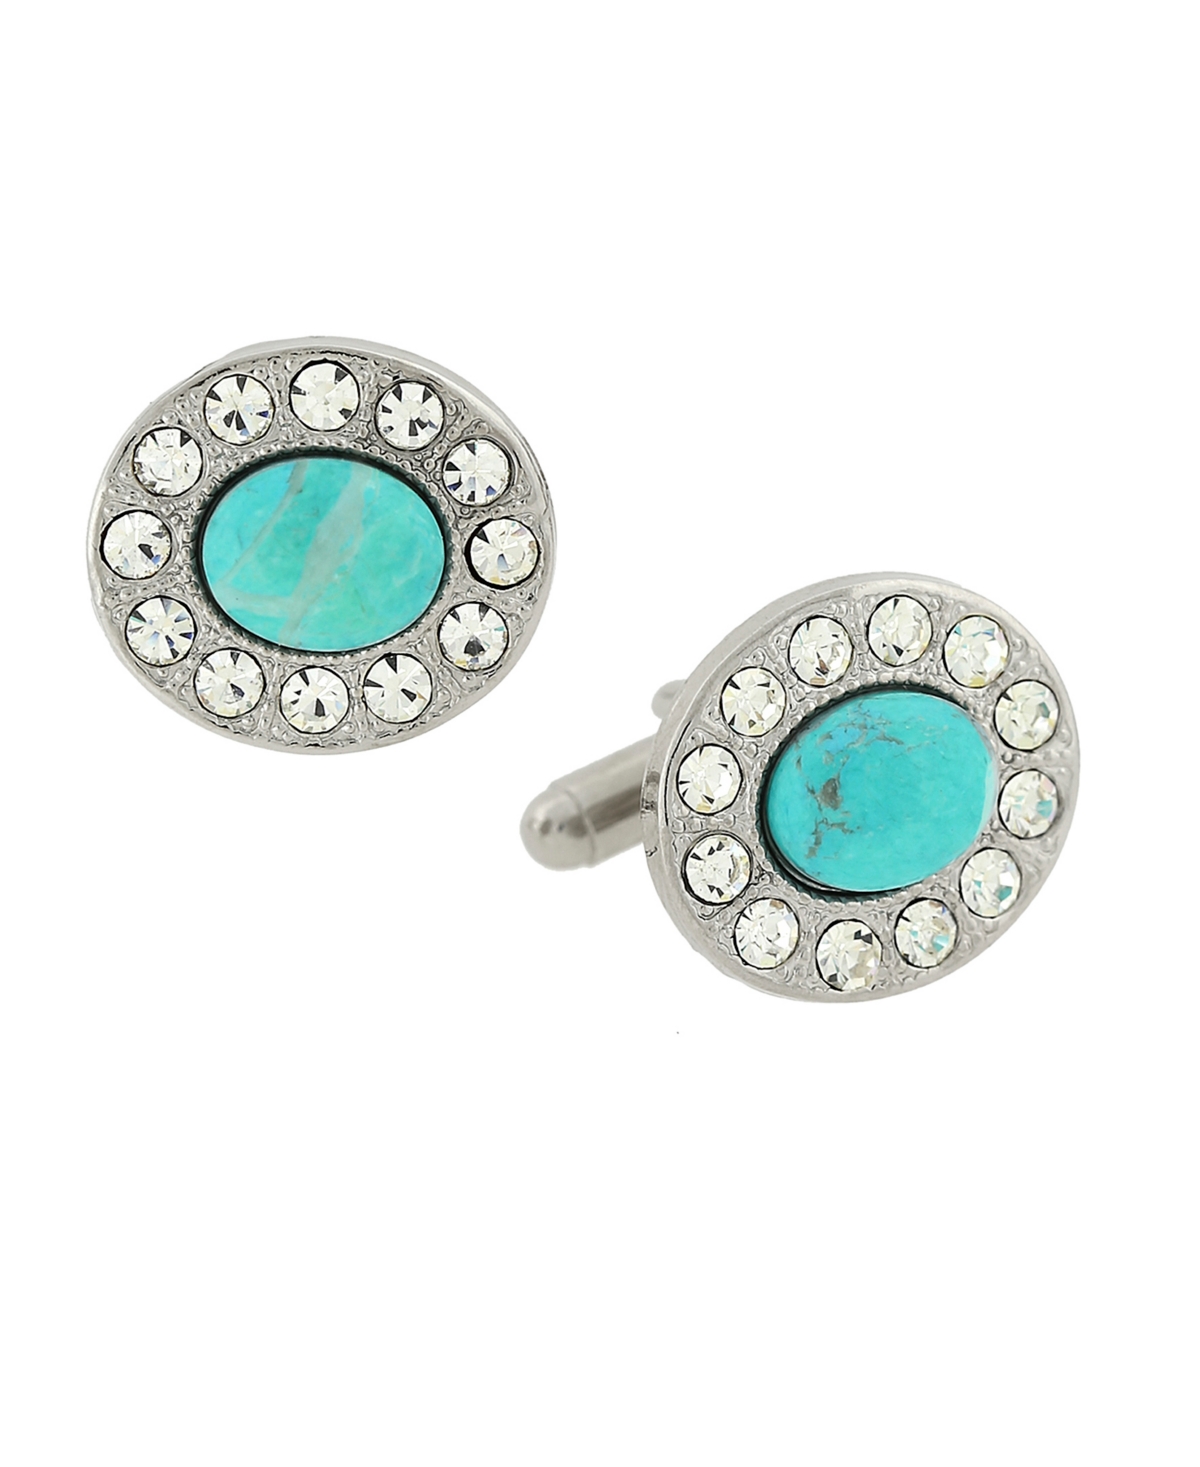 Jewelry Silver-Tone Oval Cufflinks - Turquoise